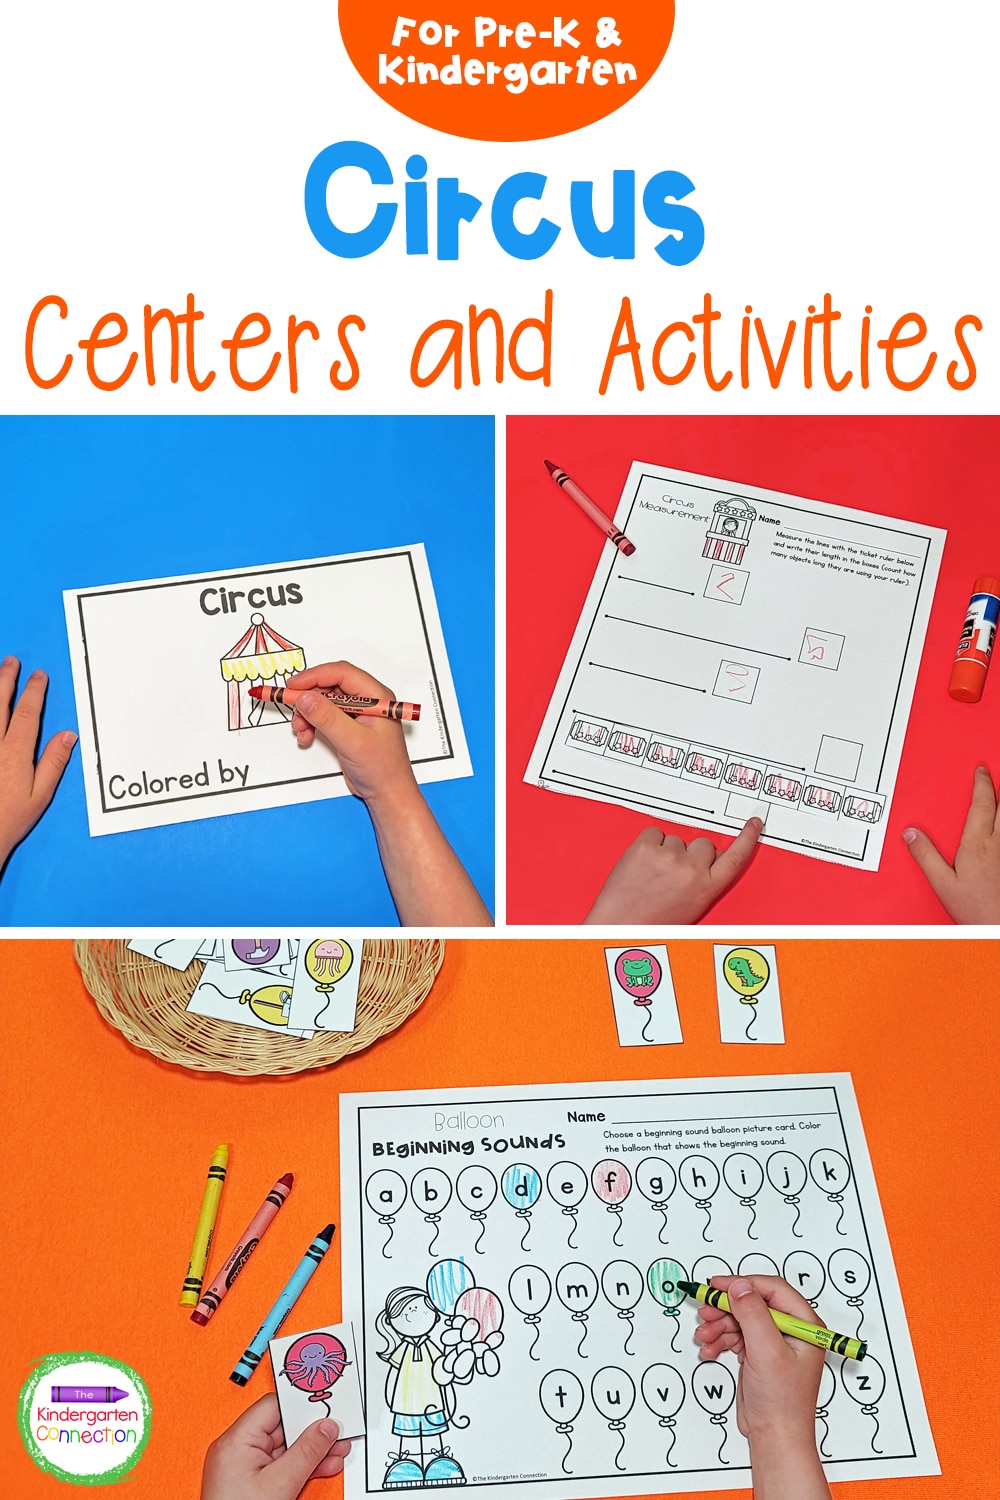 This pack of Circus Activities and Centers for Pre-K & Kindergarten is filled with tons of themed math and literacy fun!